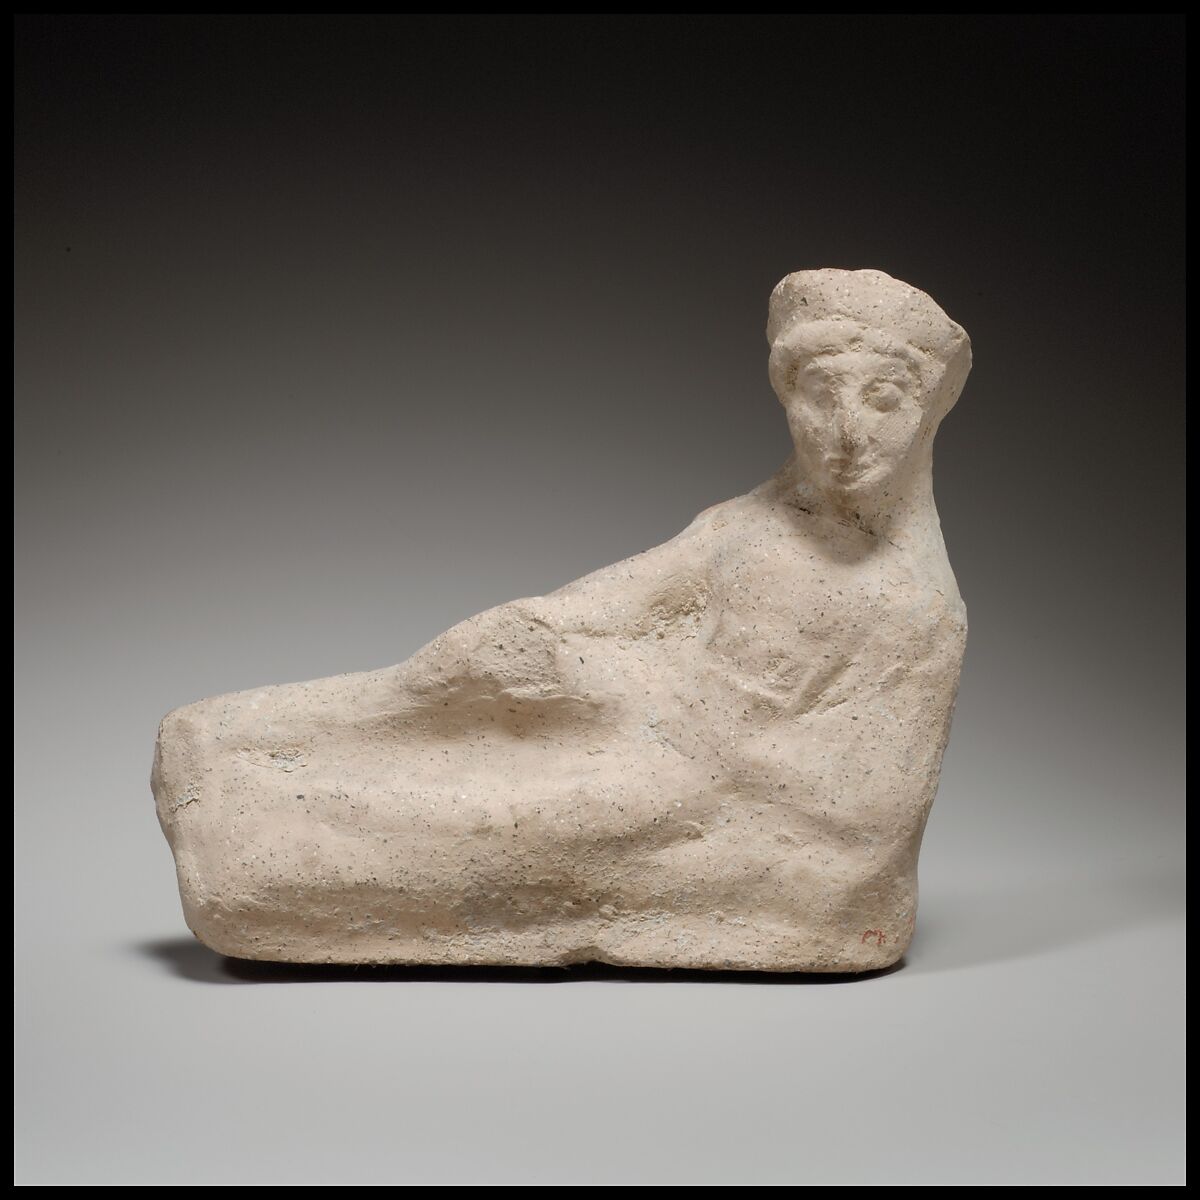 Terracotta statuette of a reclining youth, Terracotta, Cypriot 